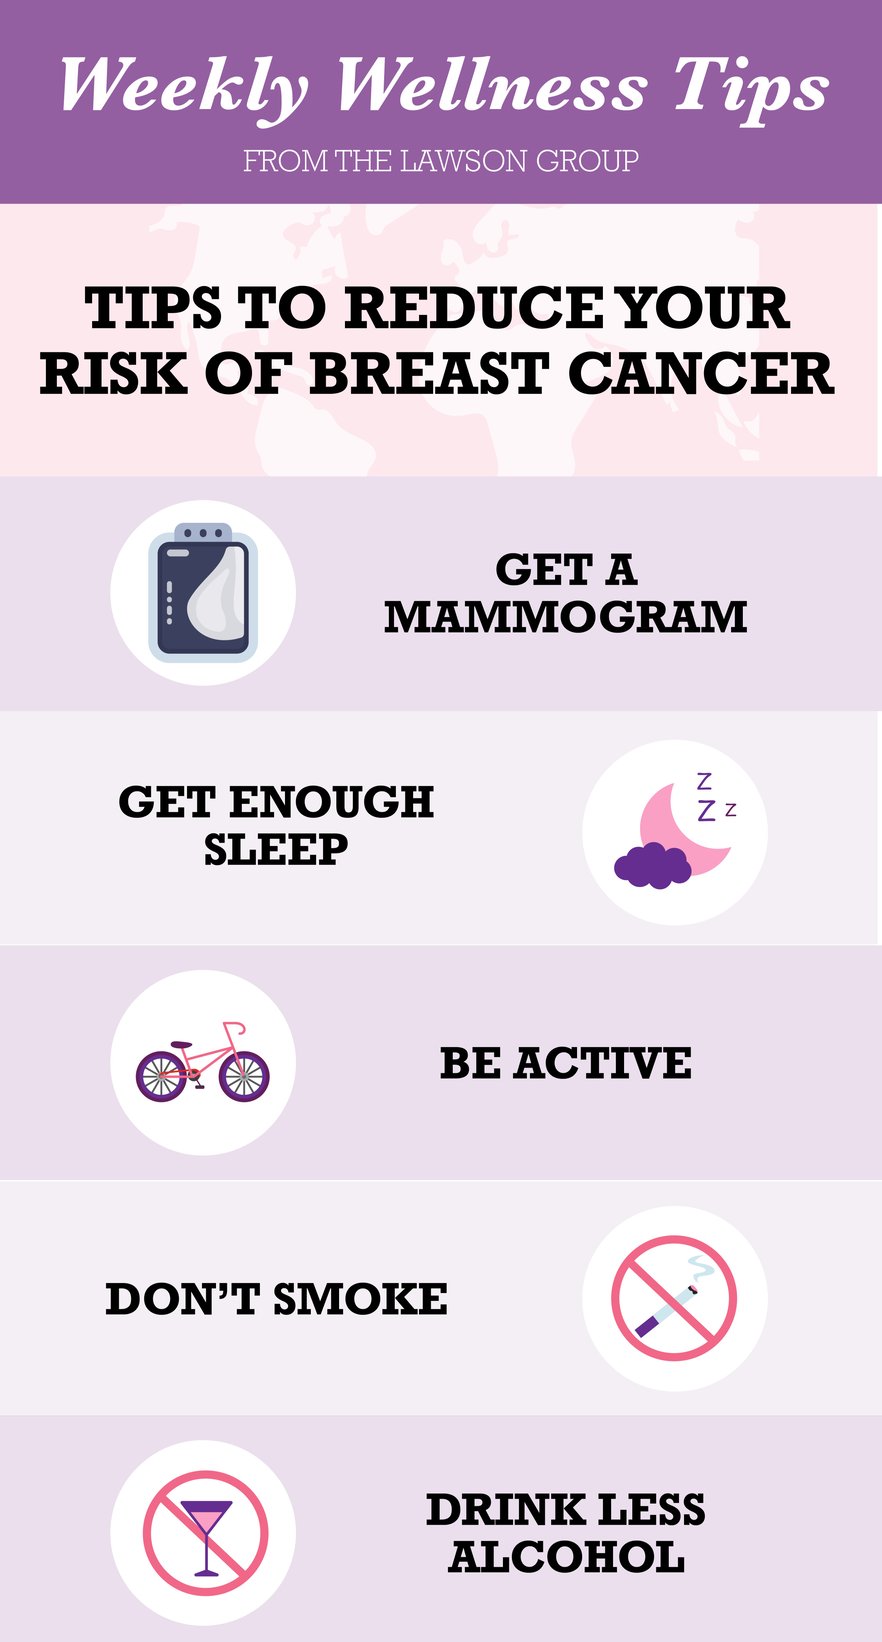 TLG22005 Wellness Tips Breast Cancer Awareness Infographic-1080px-01